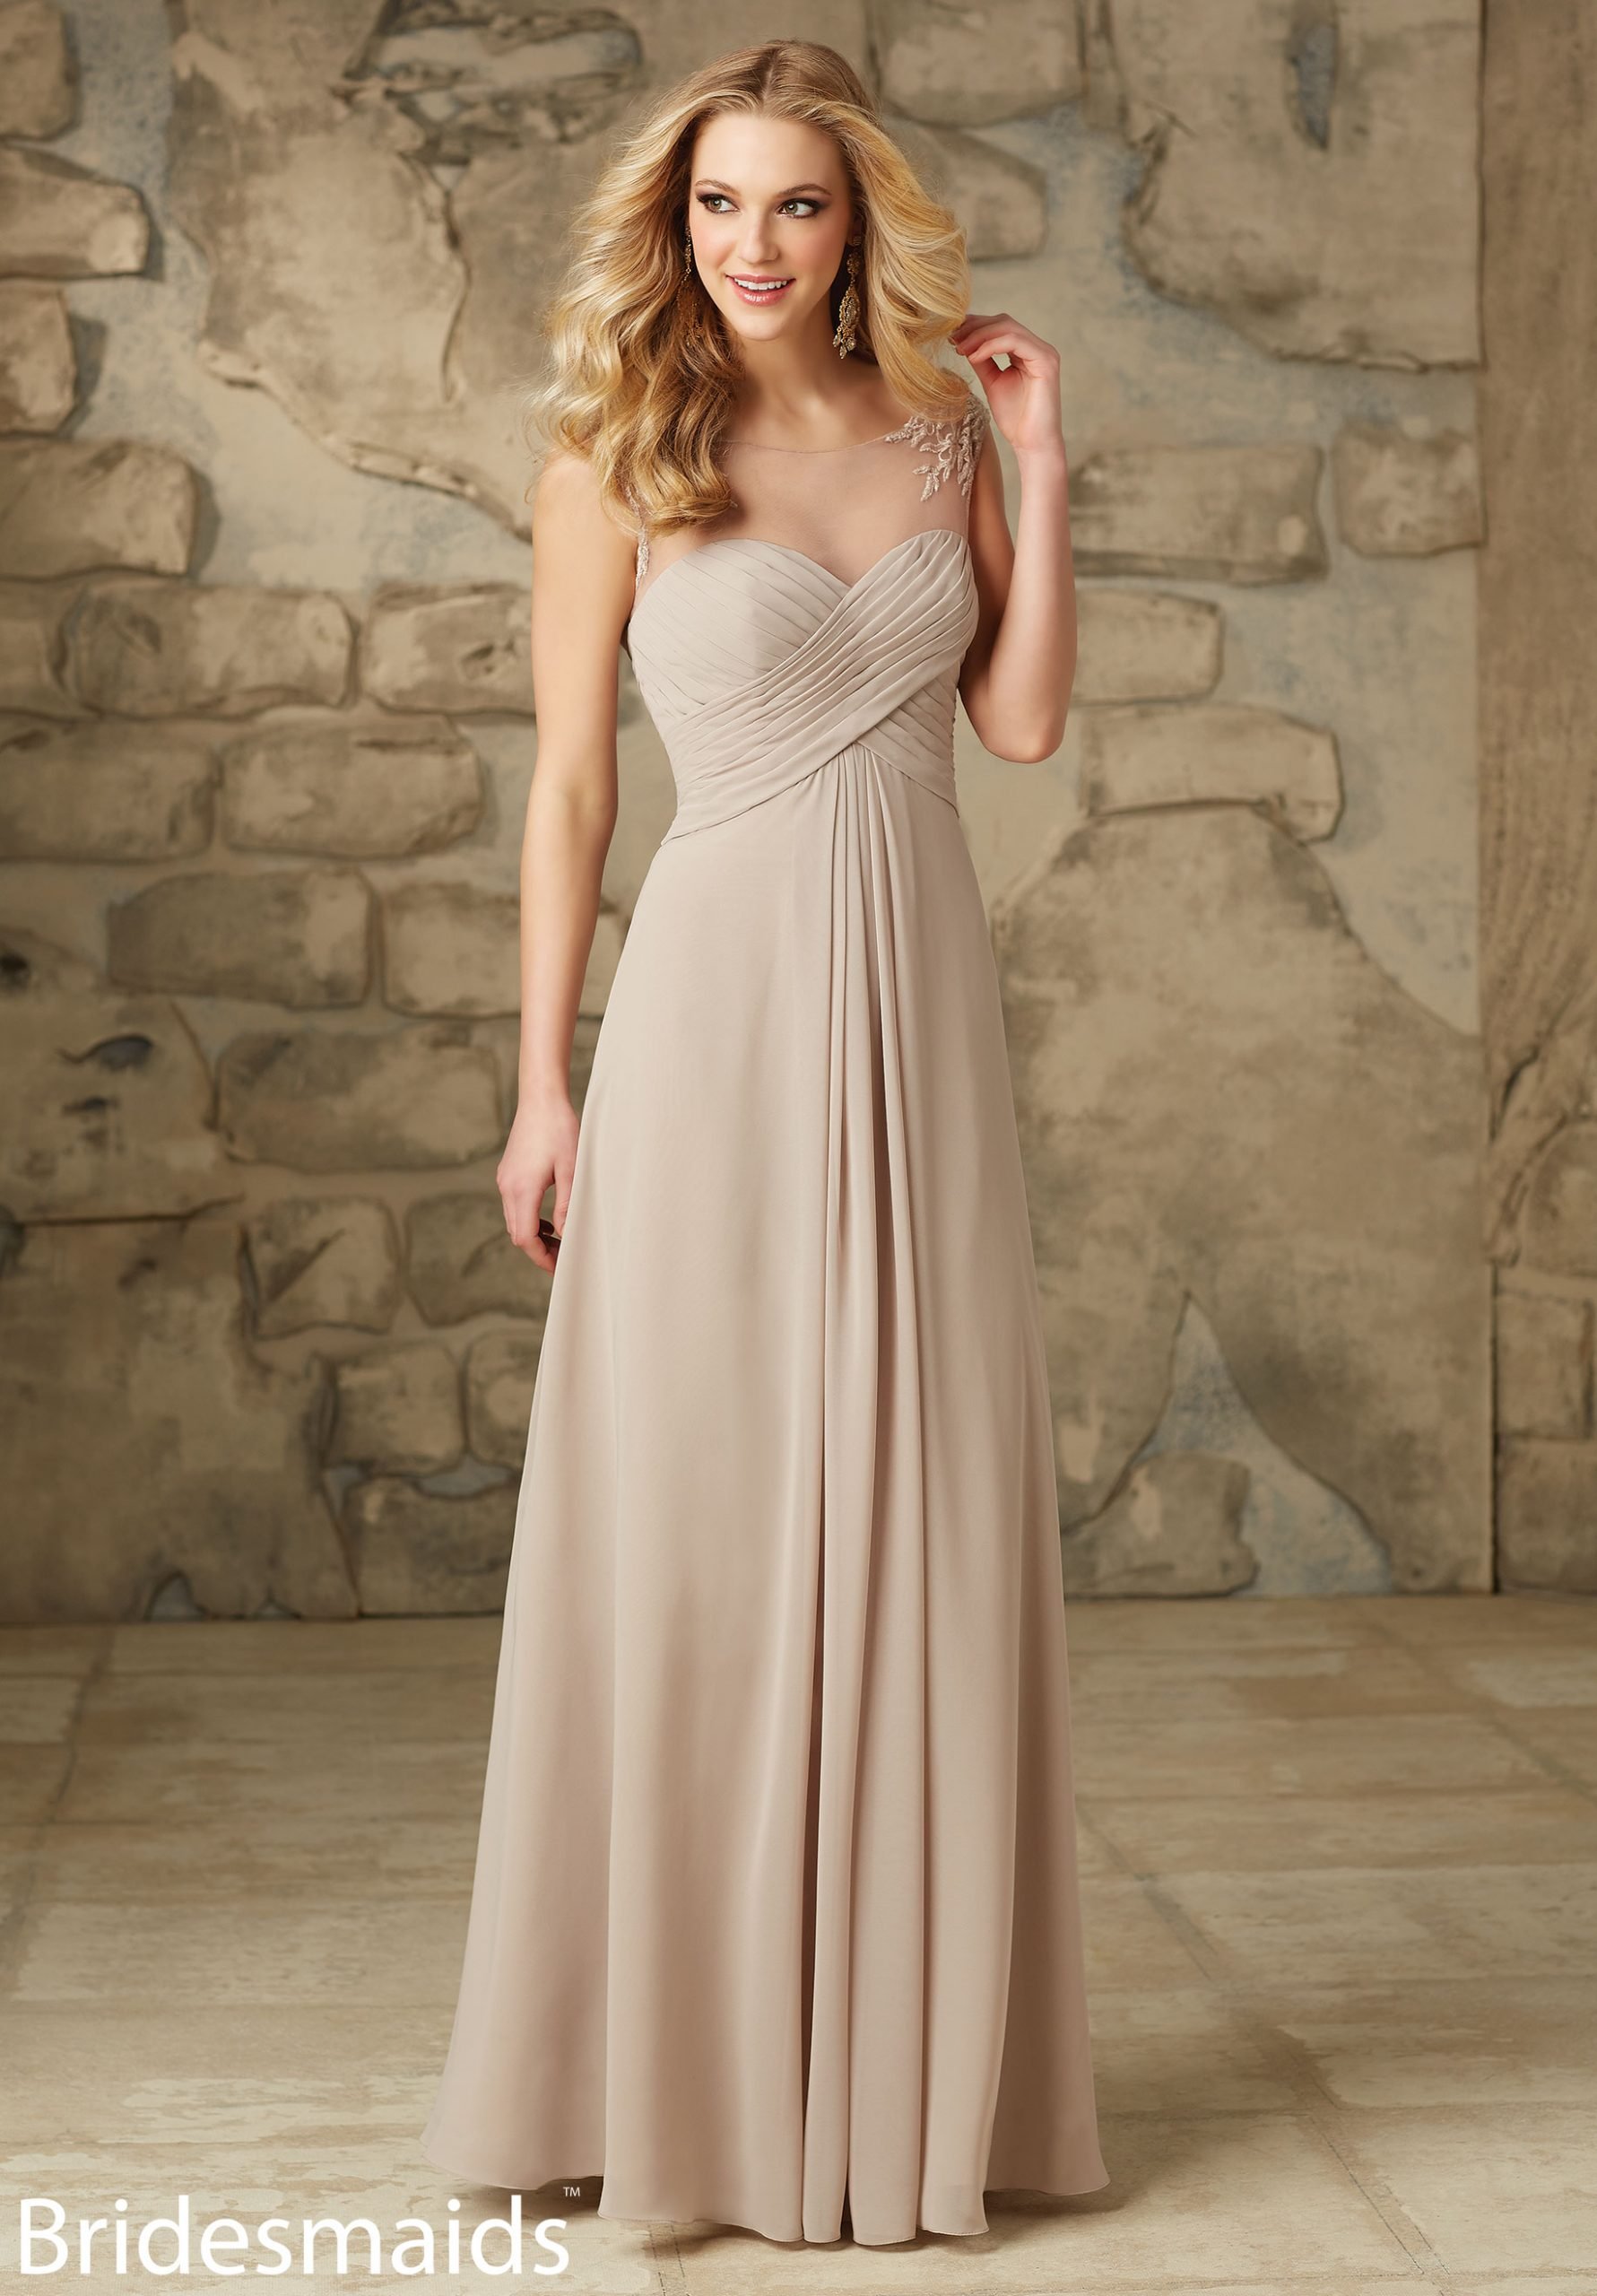 Champagne Color Bridesmaid Dresses too washed out?